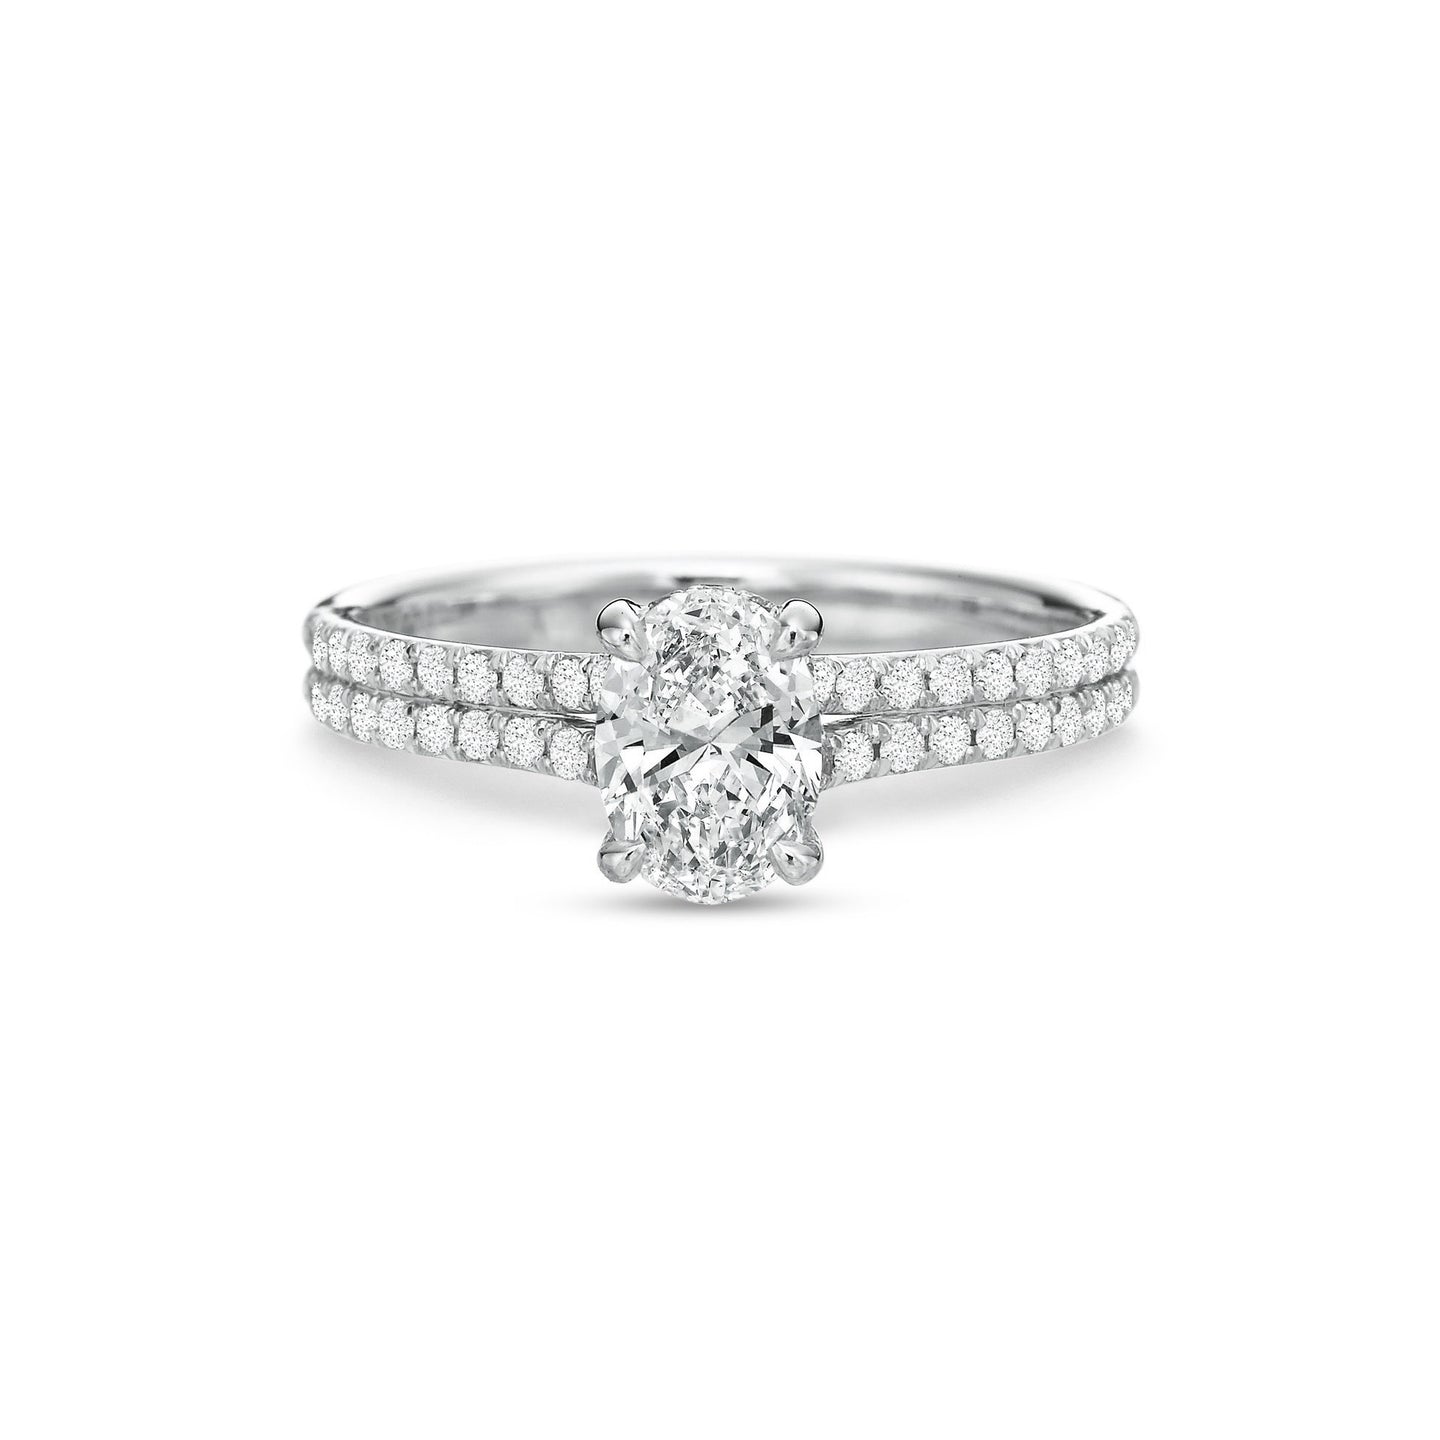 Fink's Exclusive 18K White Gold Oval Center Stone Two Row Shank Engagement Ring